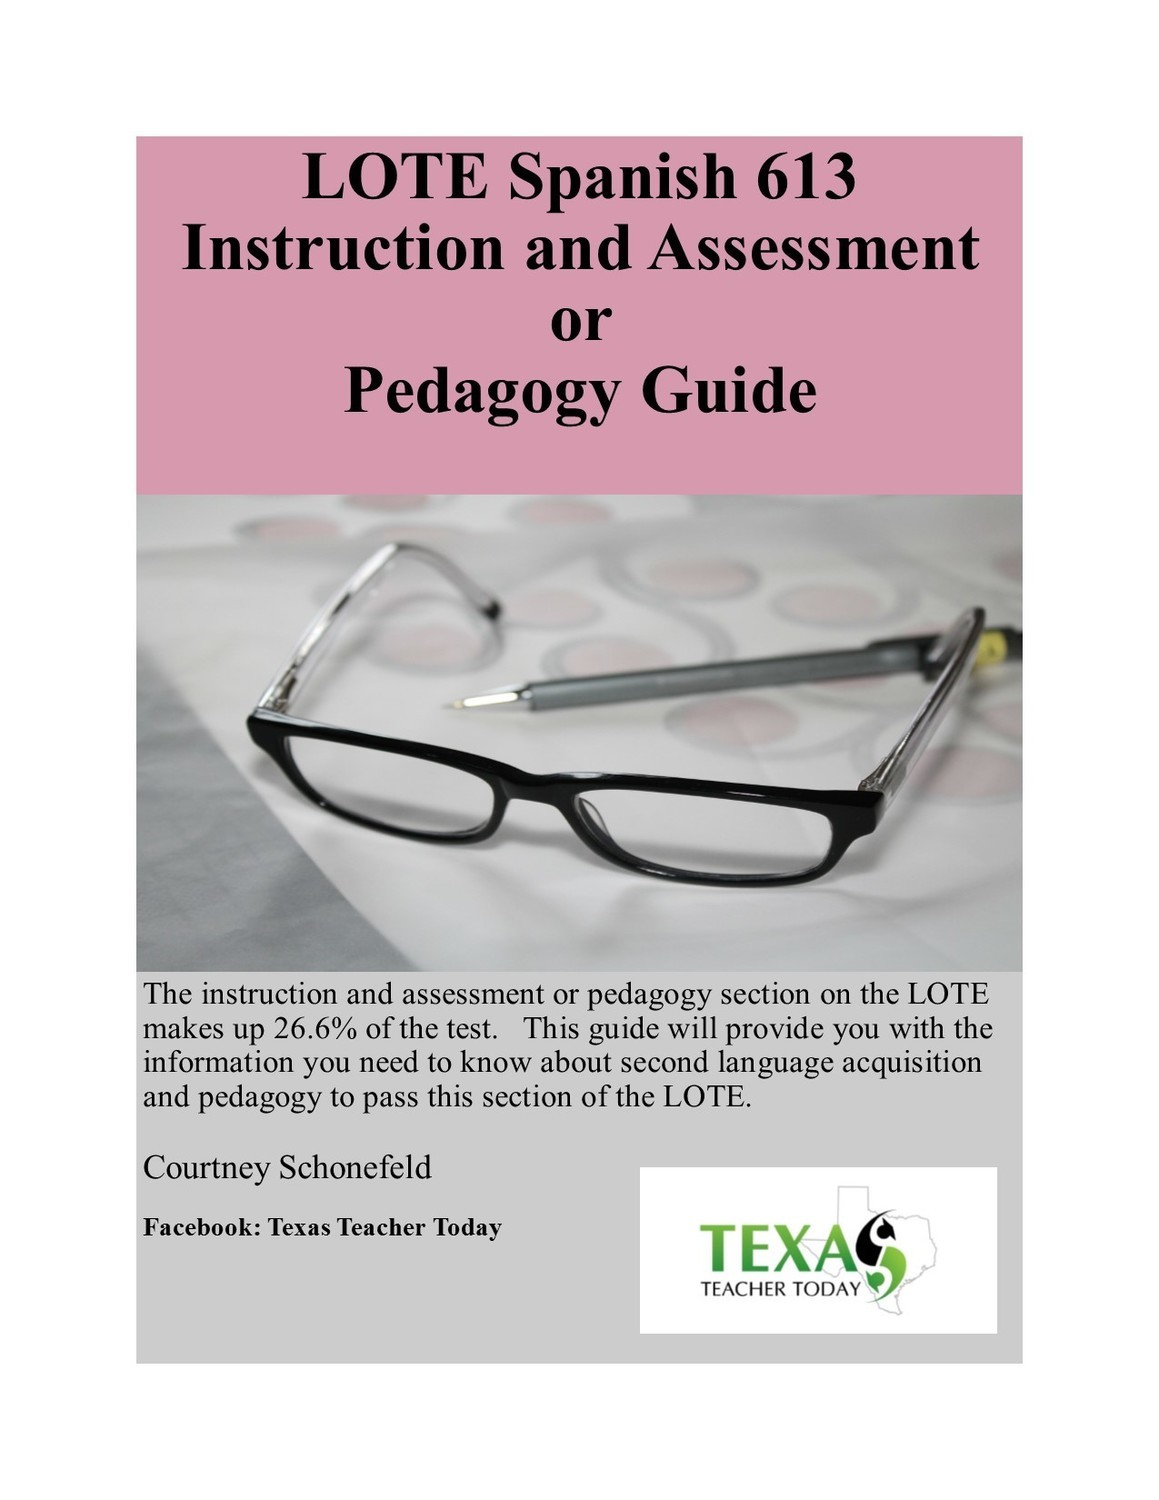 LOTE Spanish(613) Instruction and Assessment (Pedagogy) Guide